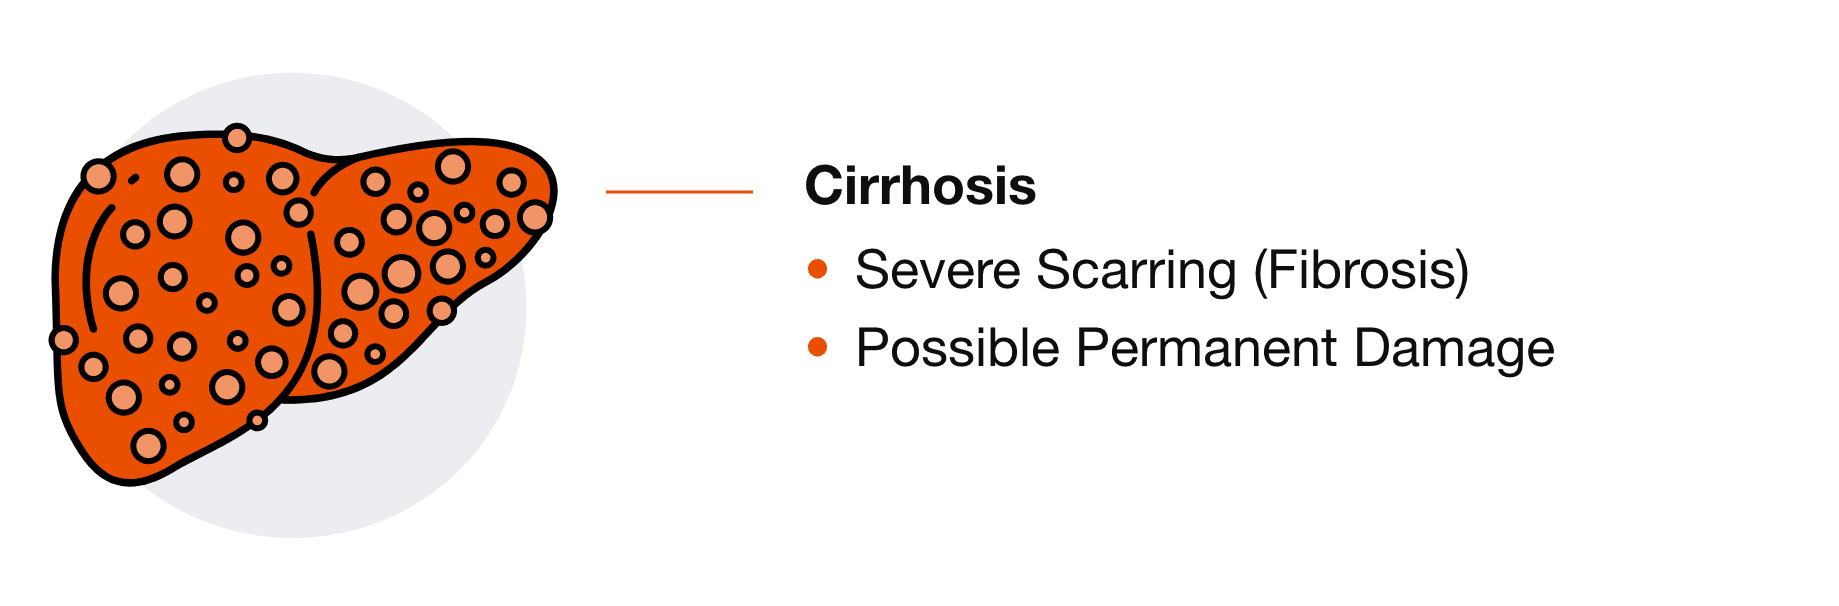 Cirrhosis: Severe Scarring (Fibrosis) and Possible Permanent Damage